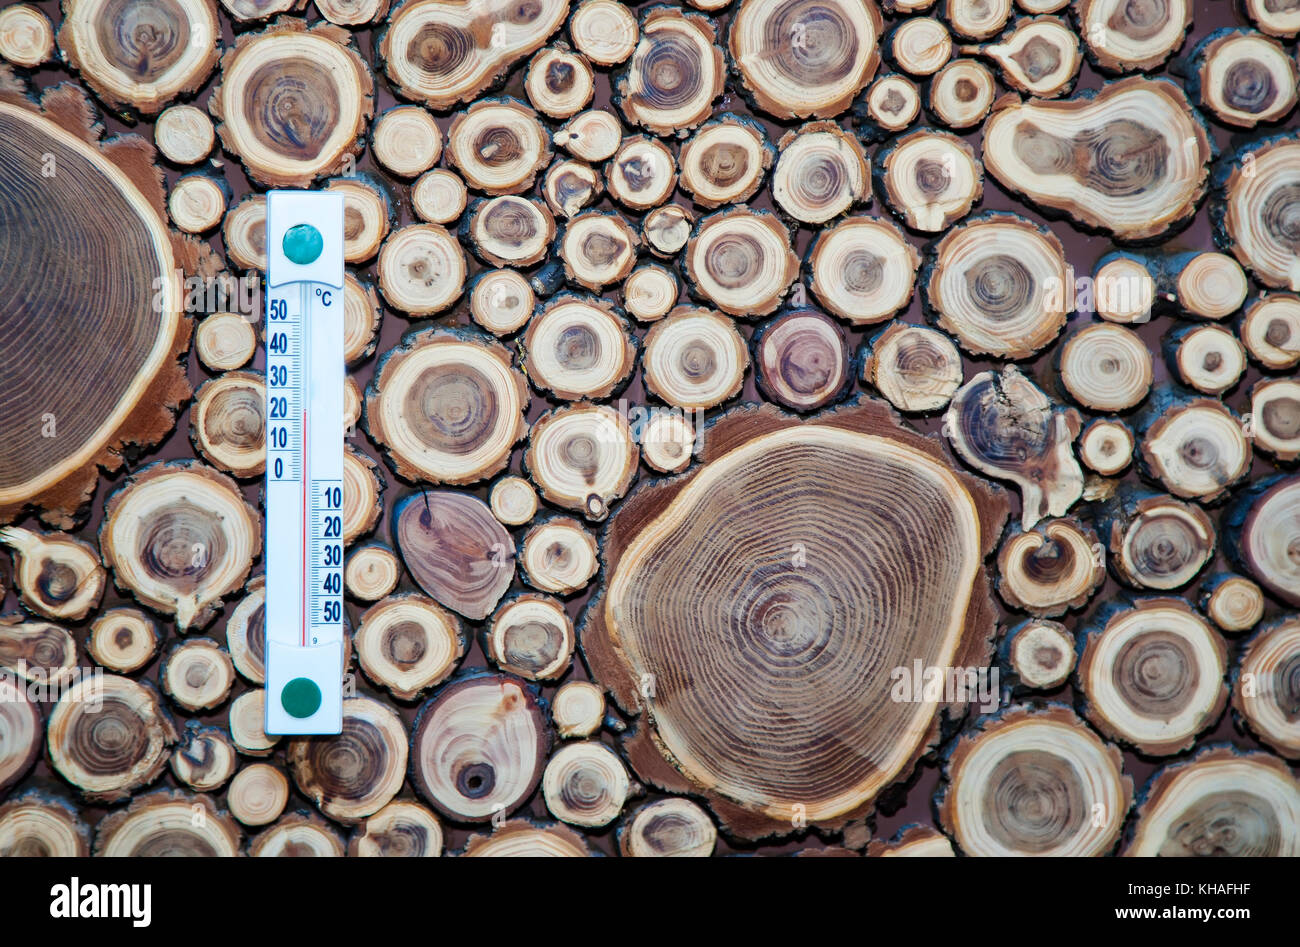 Wood thermometer calibrated in degrees celsius on the wooden wall, Stock Photo